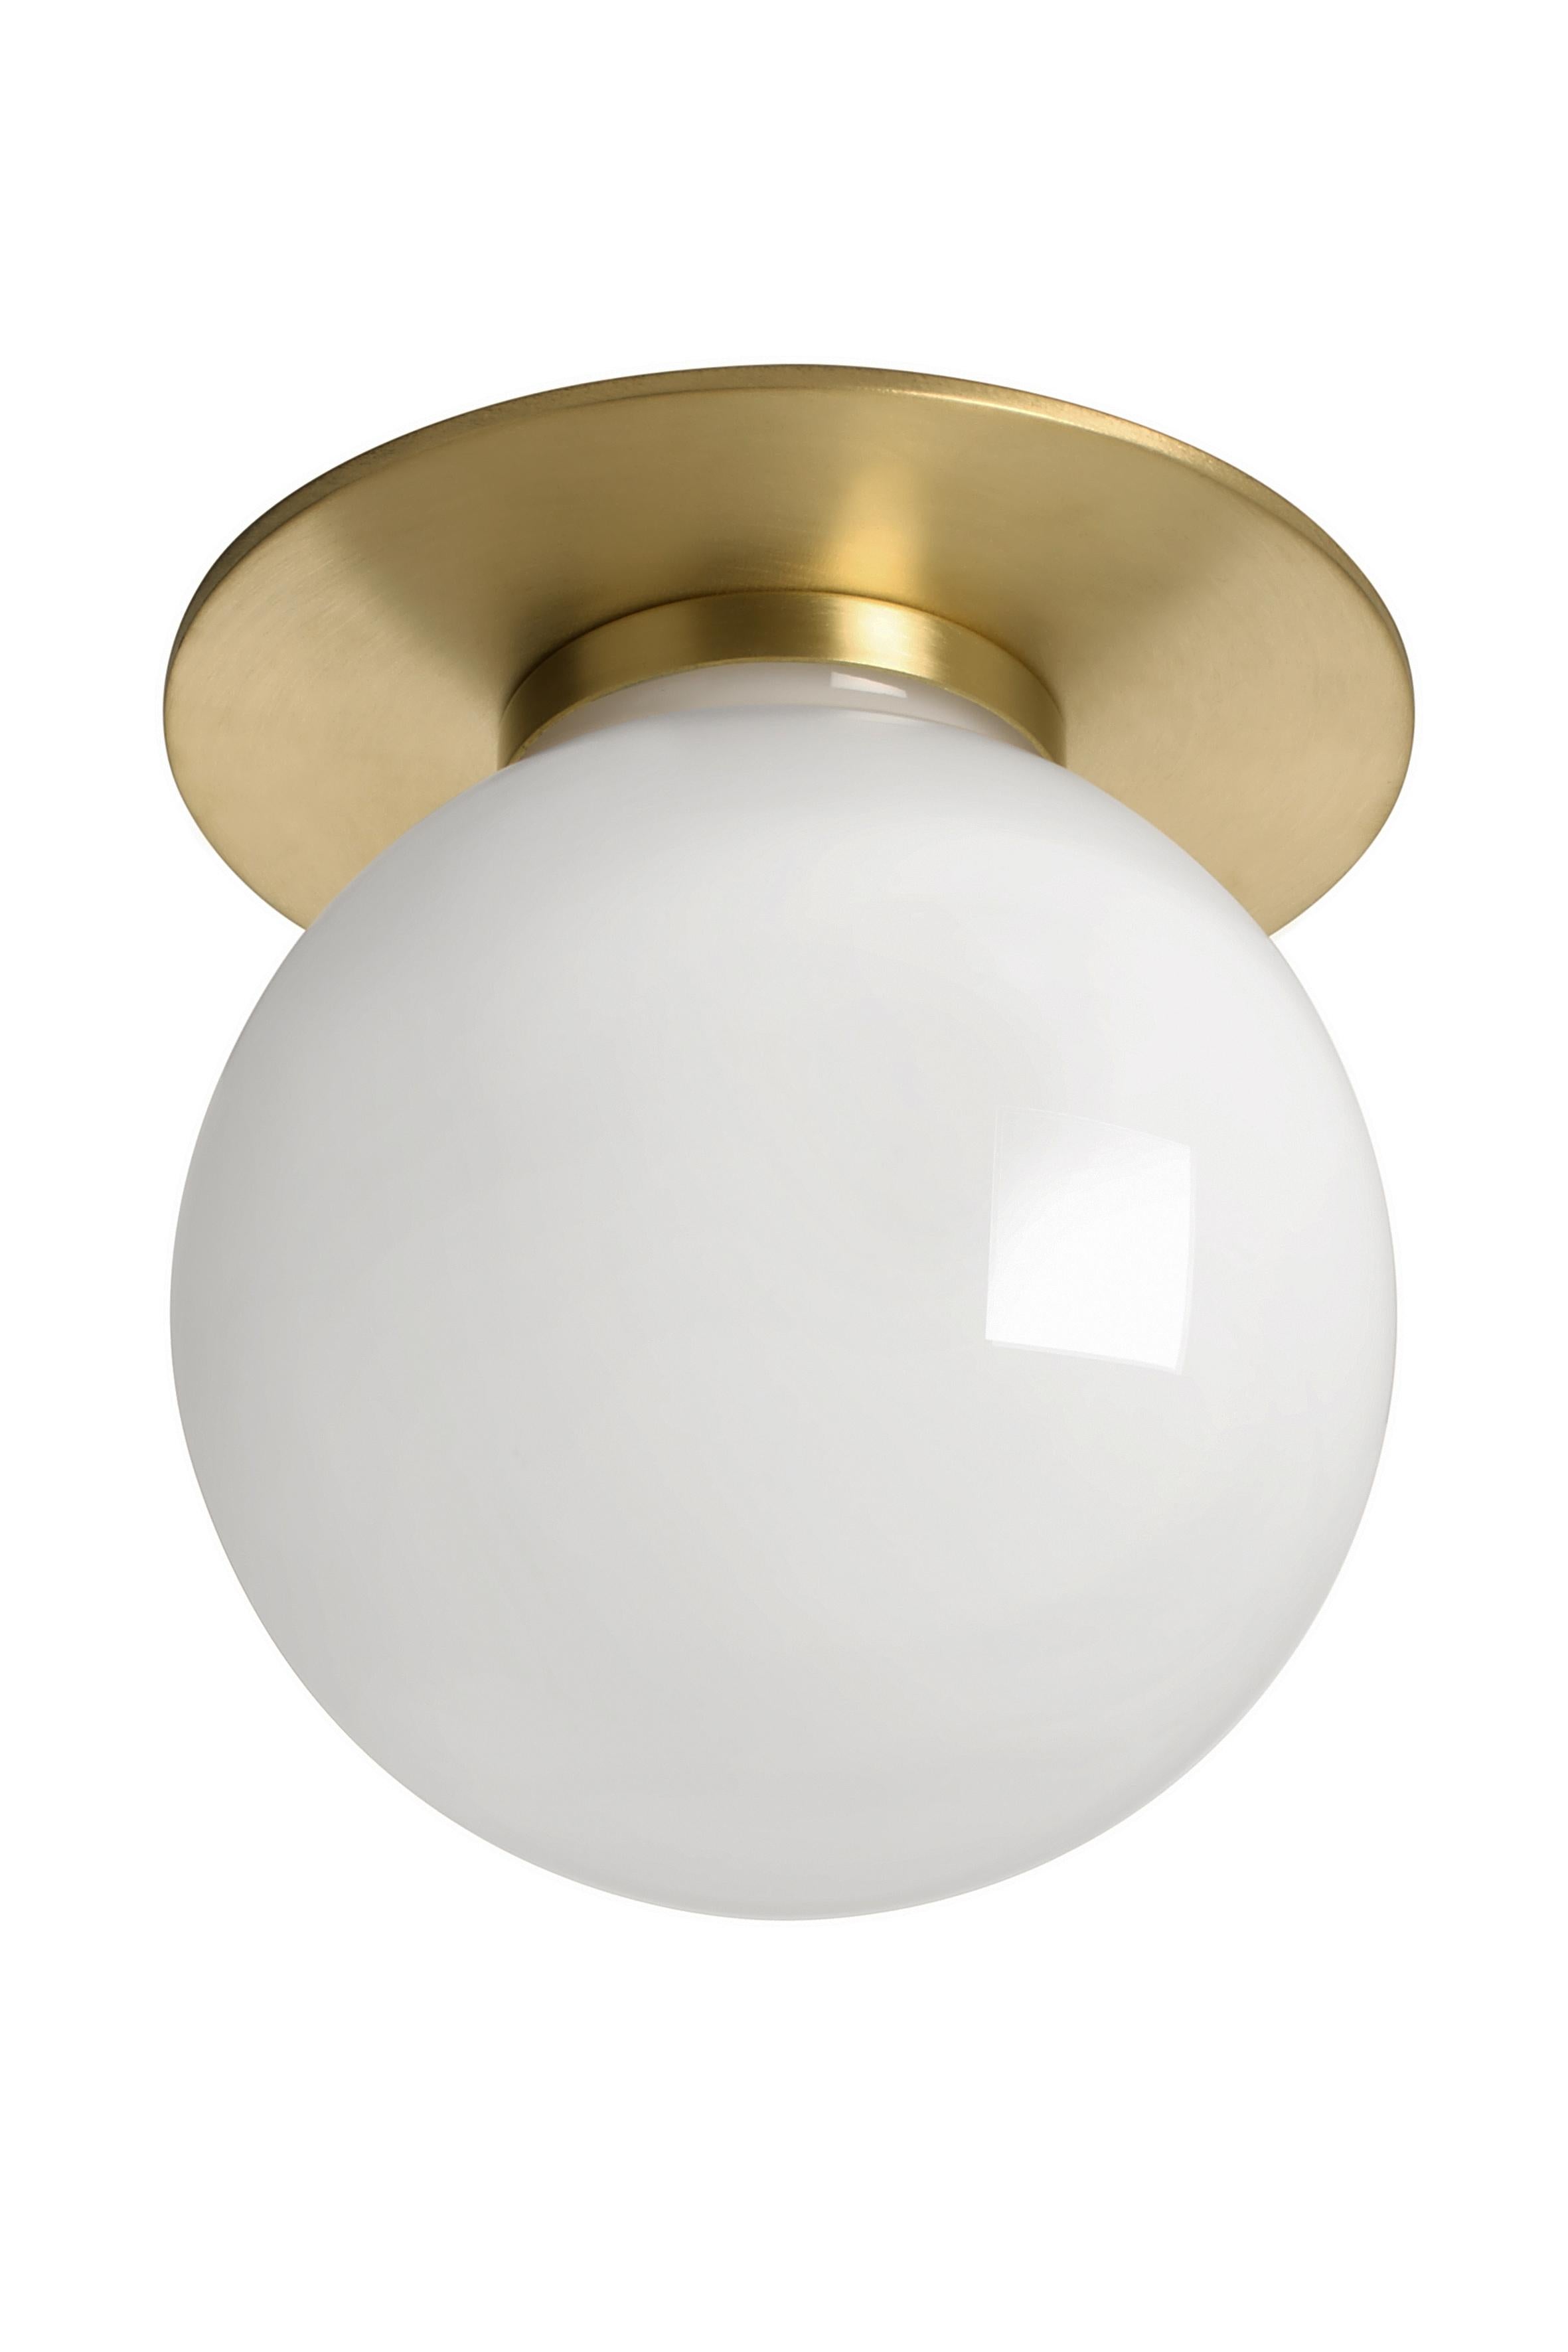 Mezzo small flush lamp by CTO Lighting
Materials: satin brass with opal glass shade
Dimensions: H 13 x W 13 cm 

All our lamps can be wired according to each country. If sold to the USA it will be wired for the USA for instance.
Other sizes